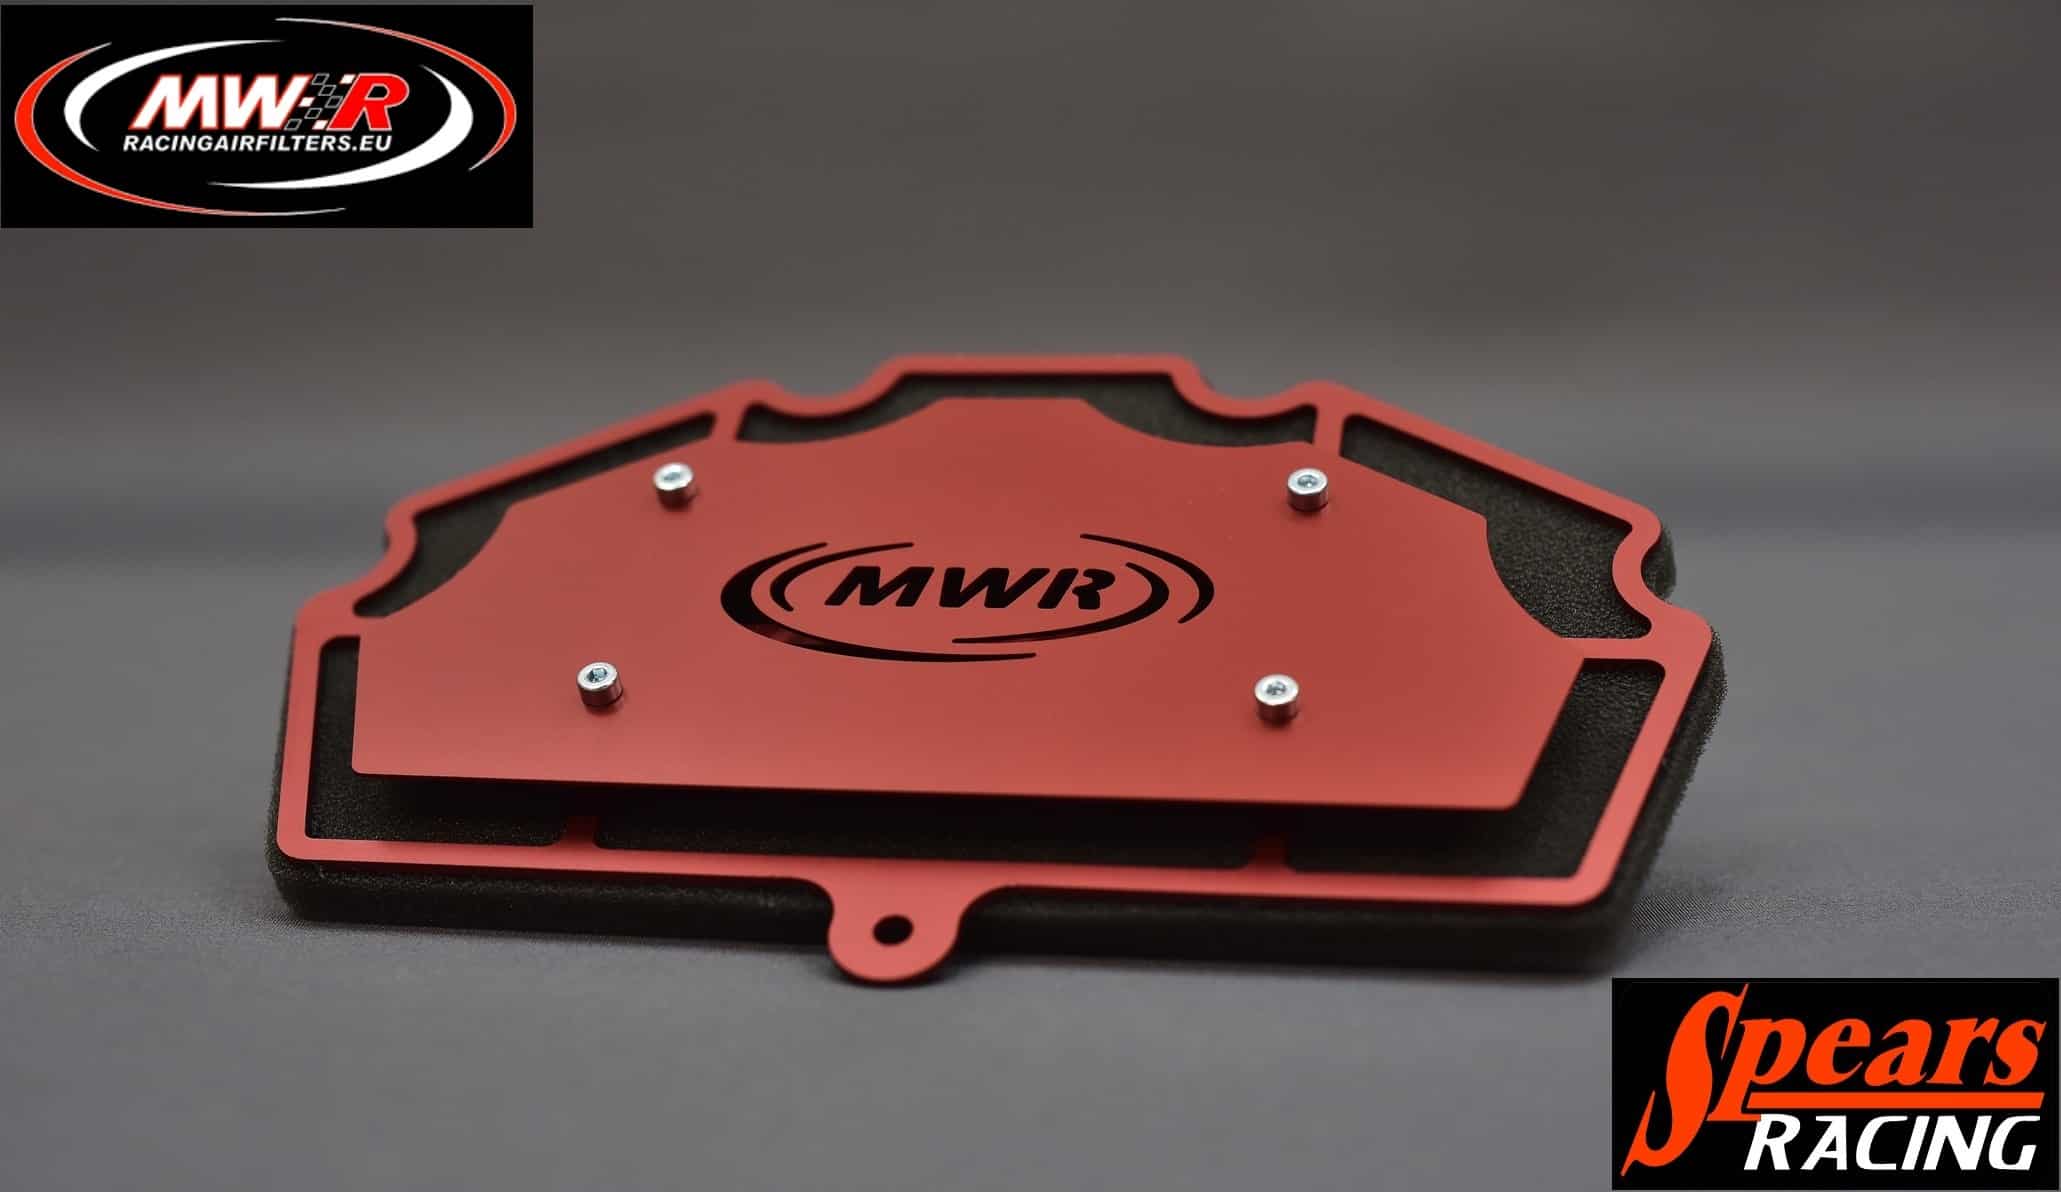 MWR Race Filter Kawasaki ZX400RR filter Is for racing